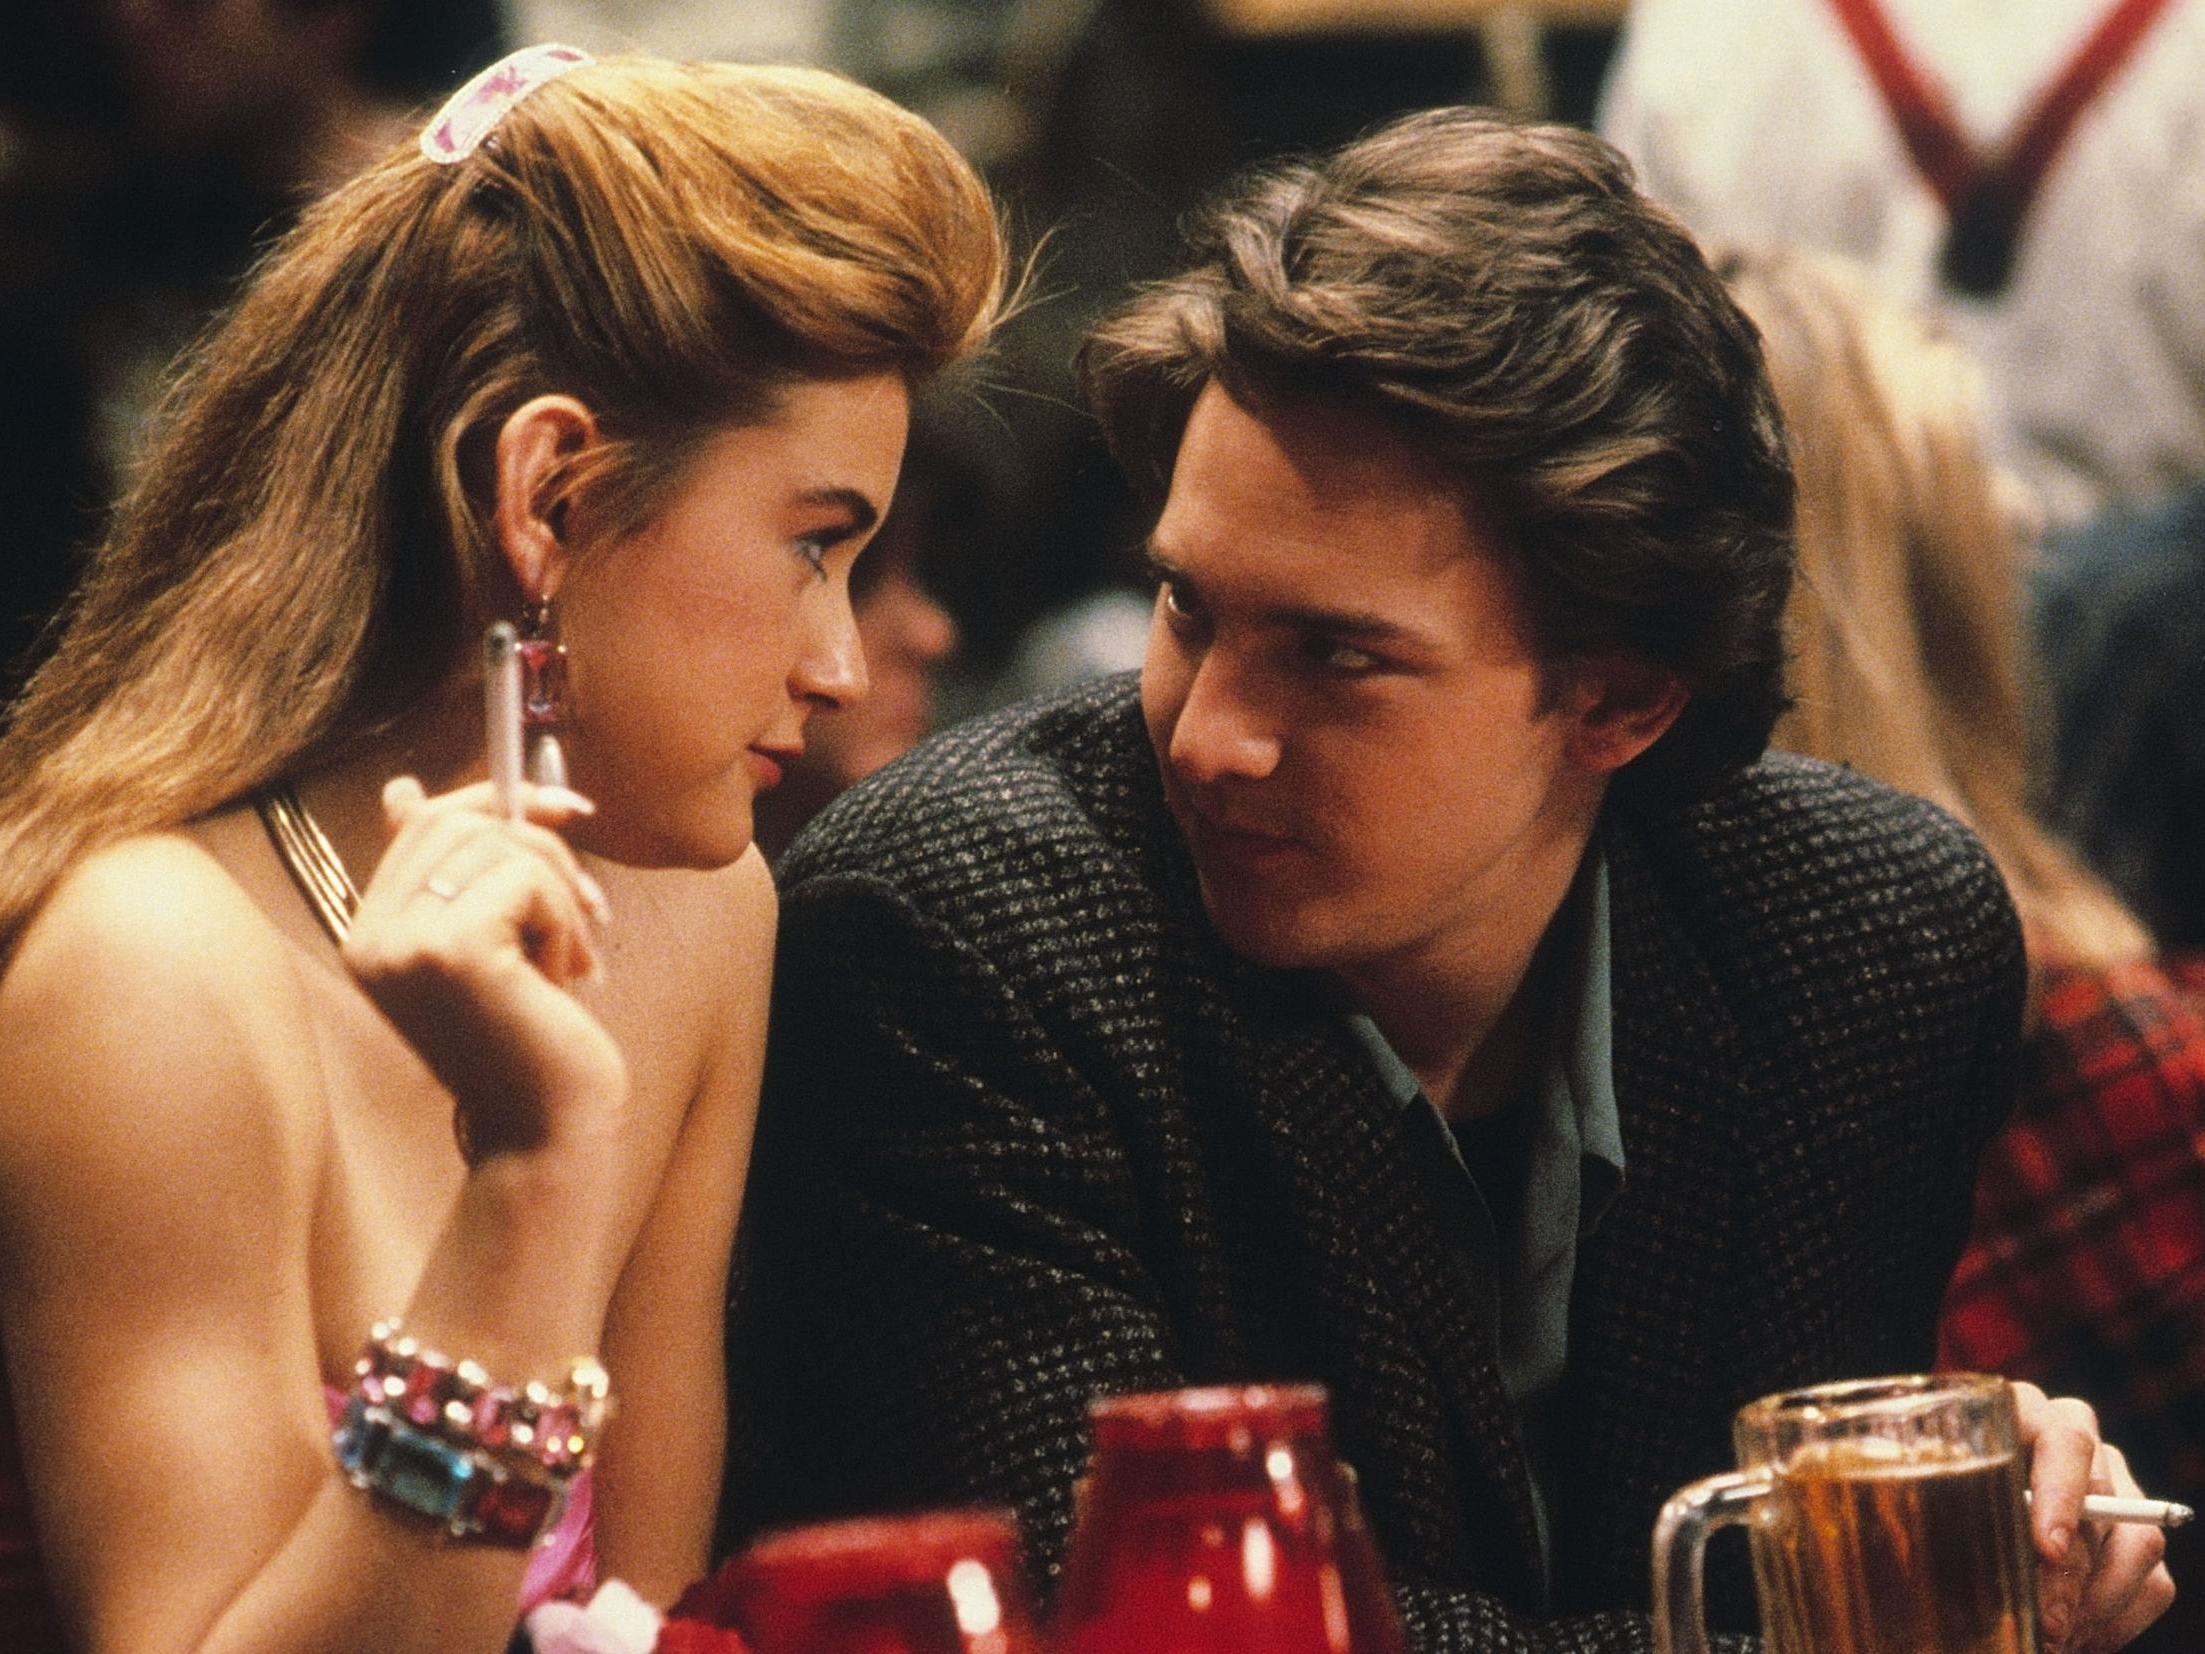 Off the rails: with Andrew McCarthy in St Elmo’s Fire, 1985